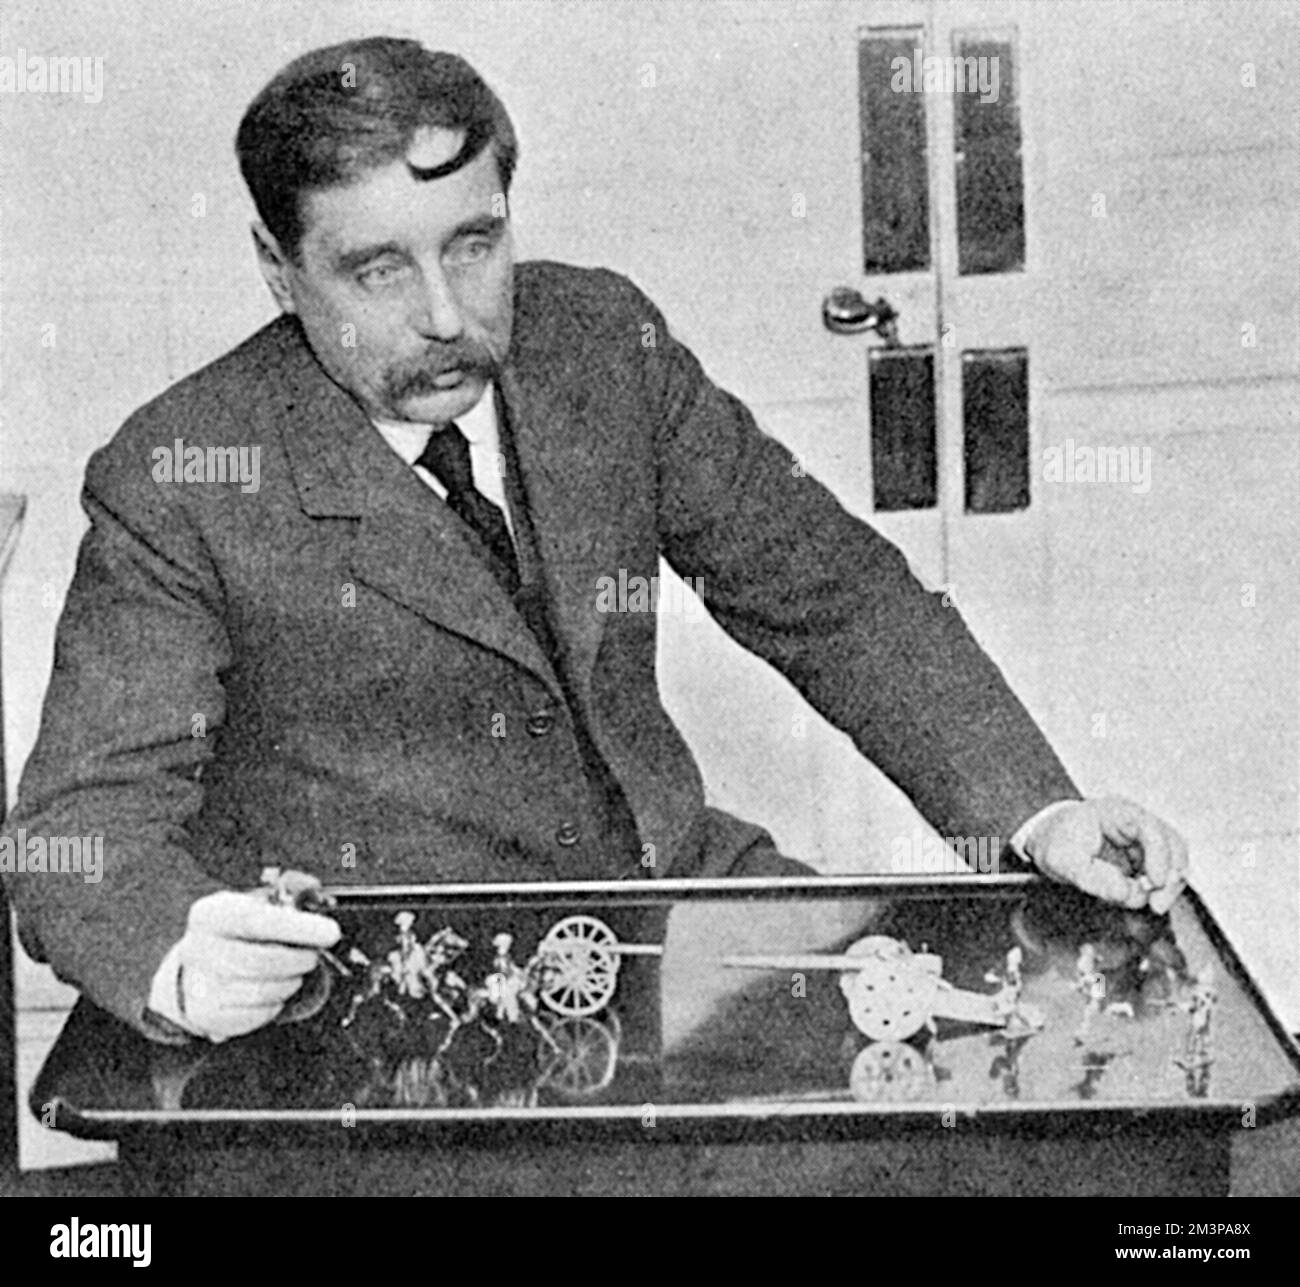 H.G.Wells playing 'Little Wars'. His book of the same name, published in 1913, described a set of rules for playing with toy soldiers, and formed the basis of hobby wargaming which is still popular today.      Date: 1915 Stock Photo